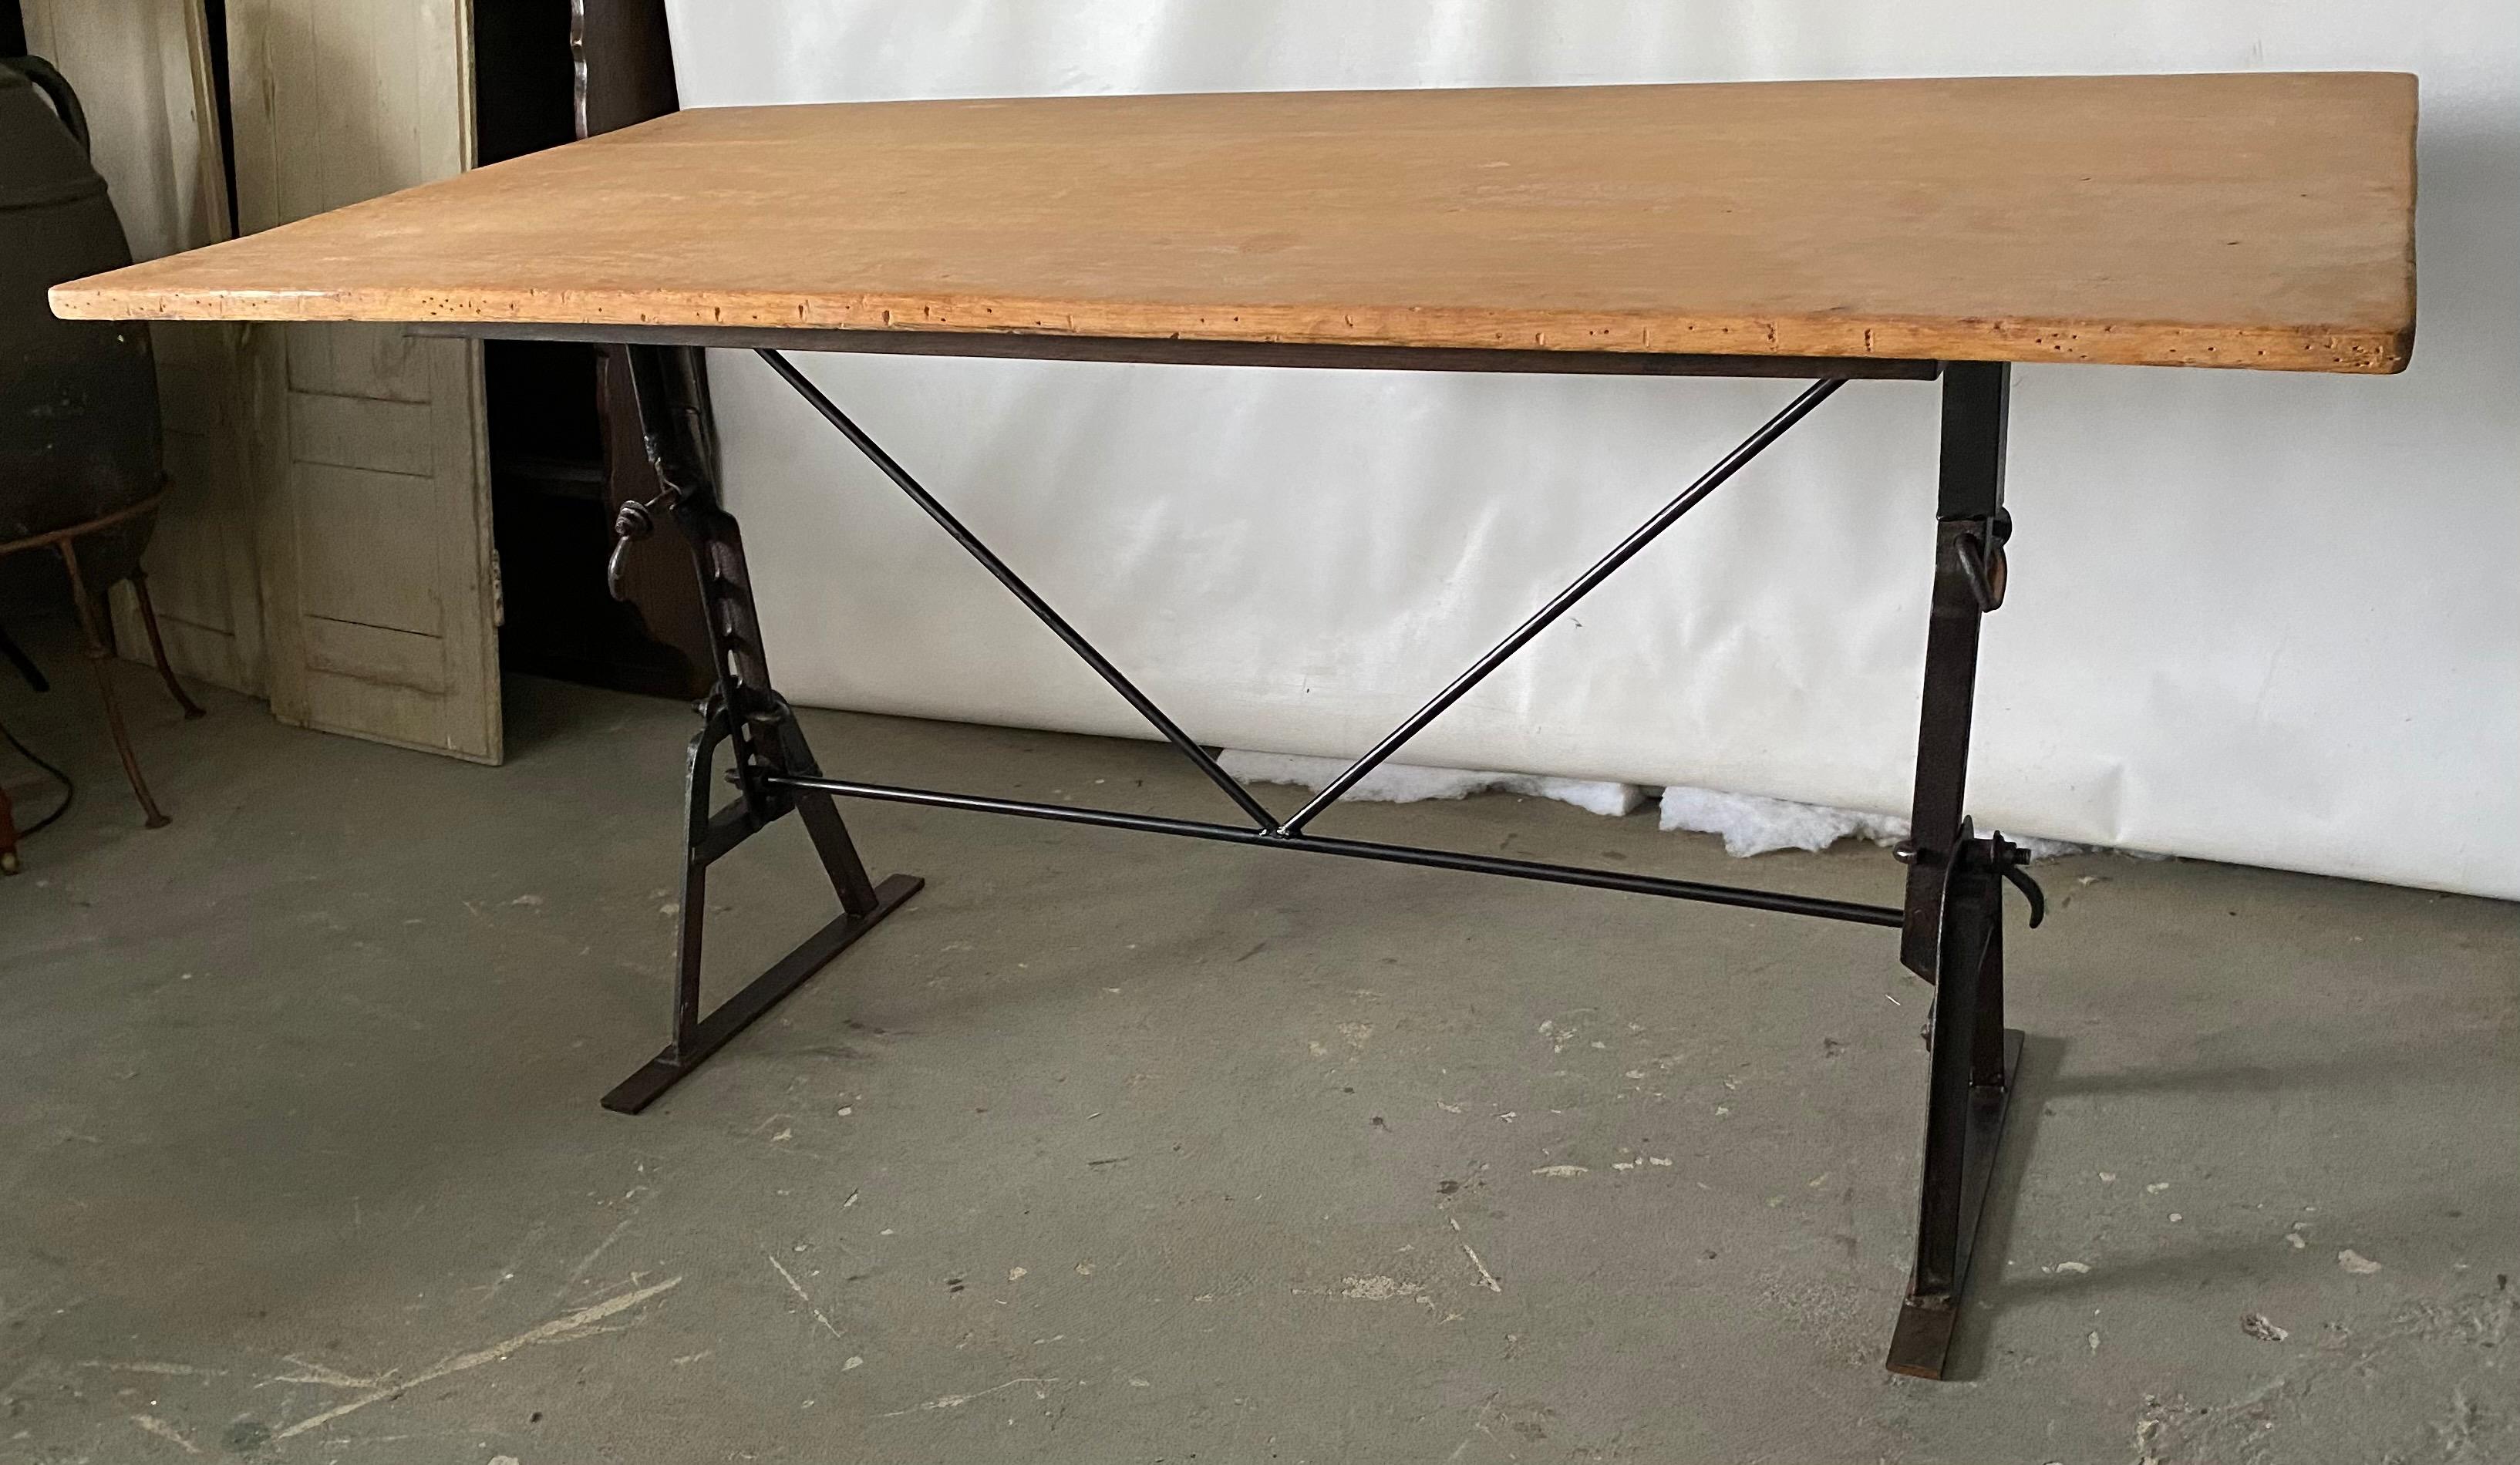 These antique metal workbench saw horses have been adapted and made into a stylish dining table base.  Partnered with a reclaimed teak wood top making it a great desk, office or writing table, a dining table in the kitchen, garden, porch or patio.